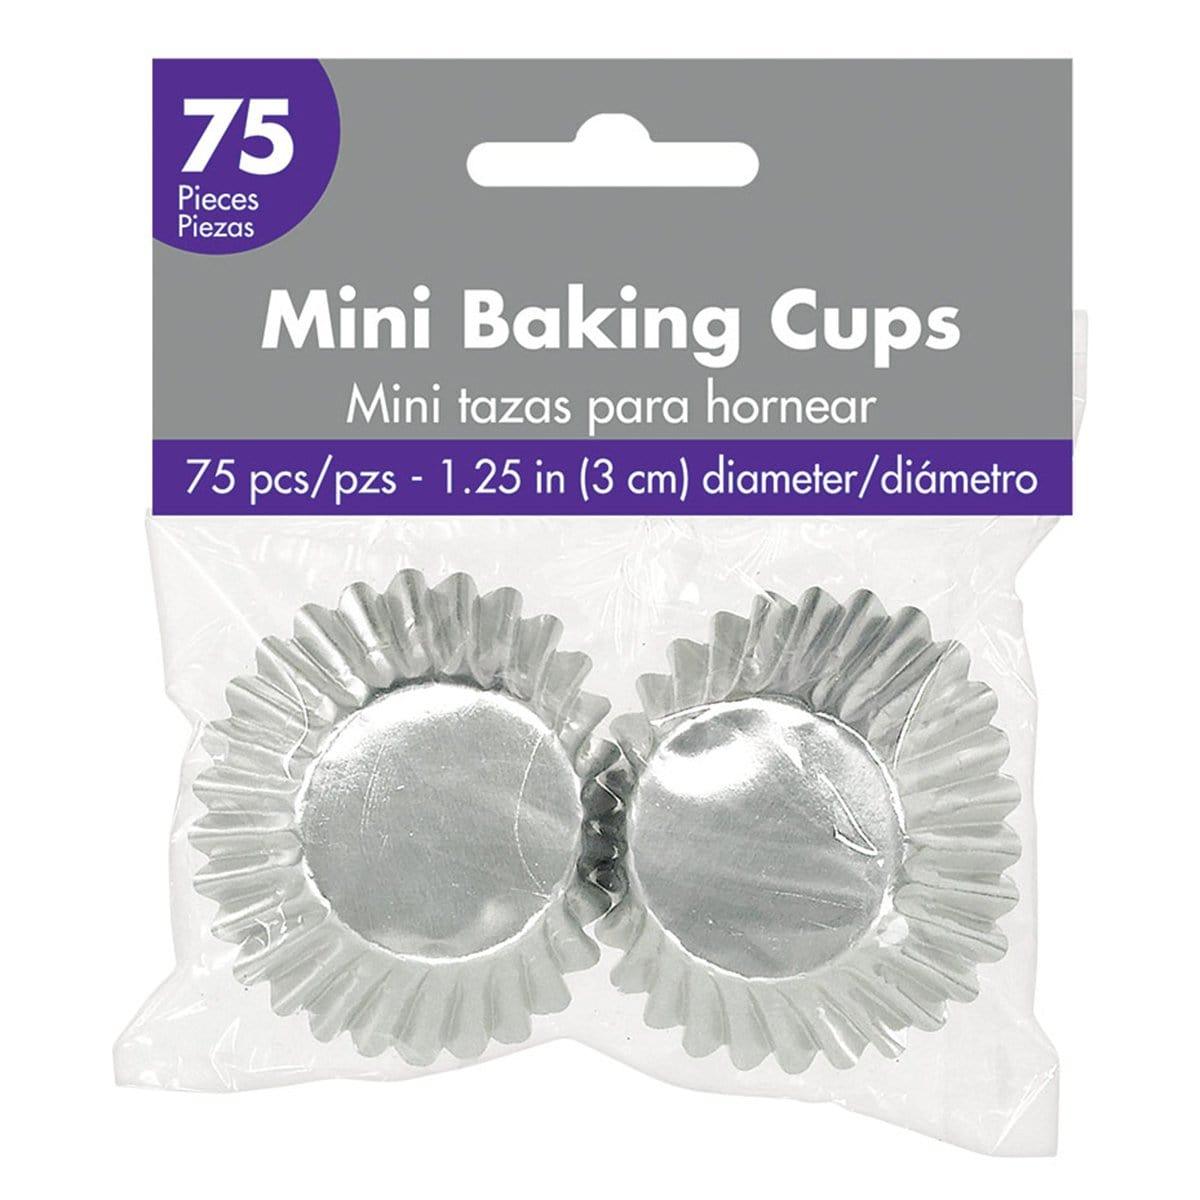 Buy Cake Supplies Mini Cupcake Cases 75/pkg - Silver sold at Party Expert